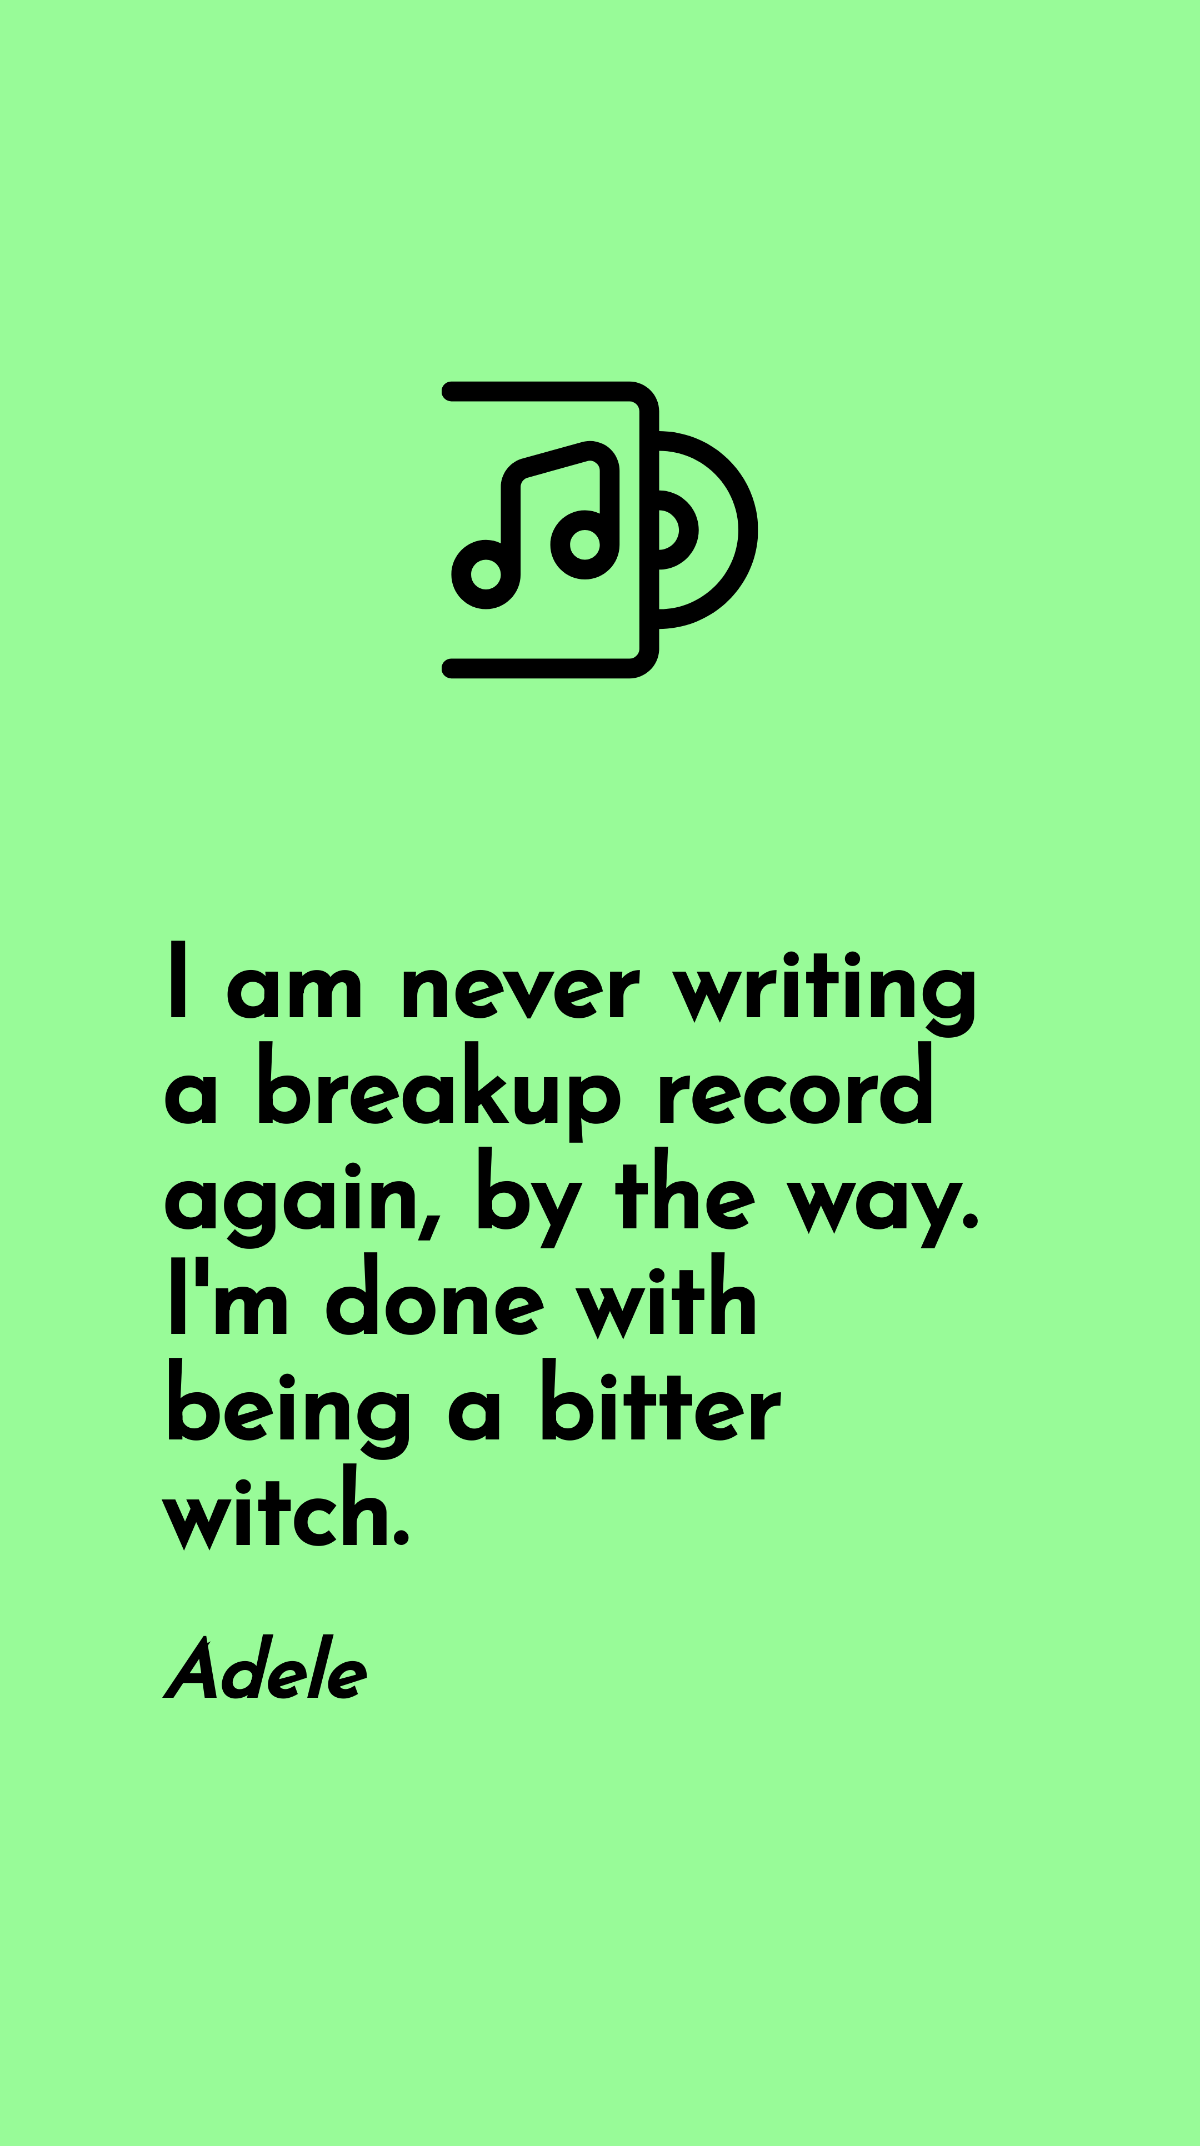 Free Adele - I am never writing a breakup record again, by the way. I'm done with being a bitter witch. Template